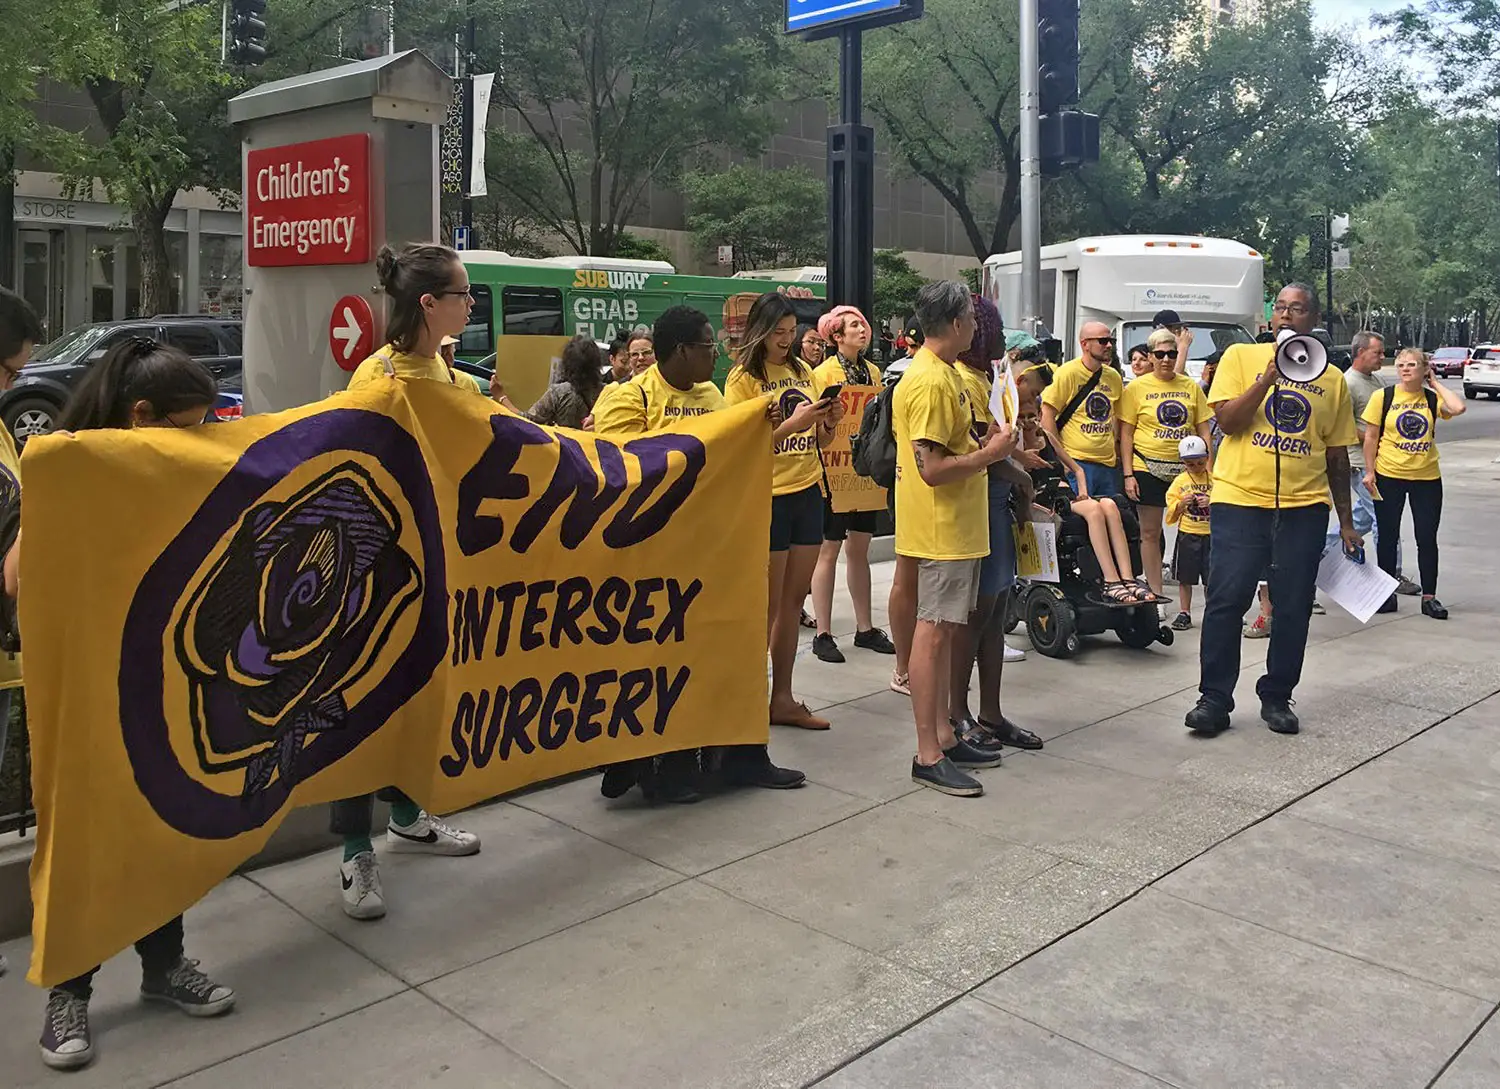 A group of activists standing outside a children’s hospital. They’re carrying a banner: “END intersex surgery.”